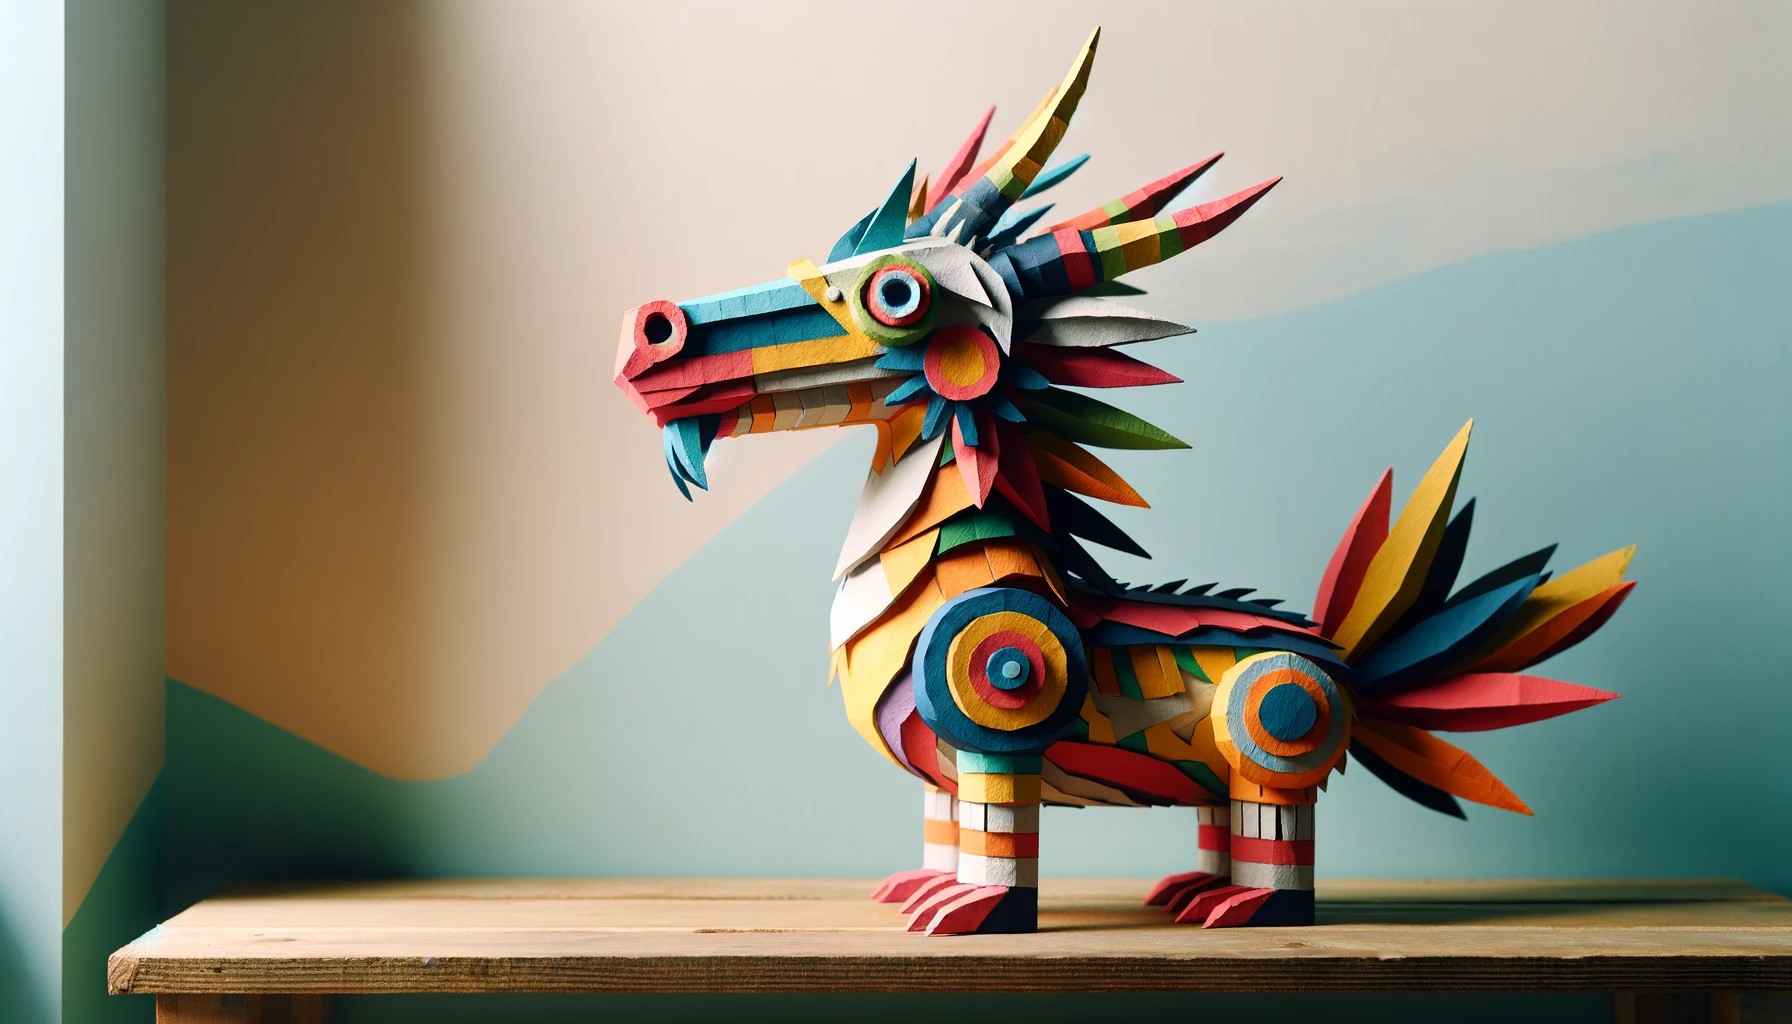 A creatively sculpted paper mâché figure, perhaps an animal or an abstract shape, painted and displayed on a shelf. 